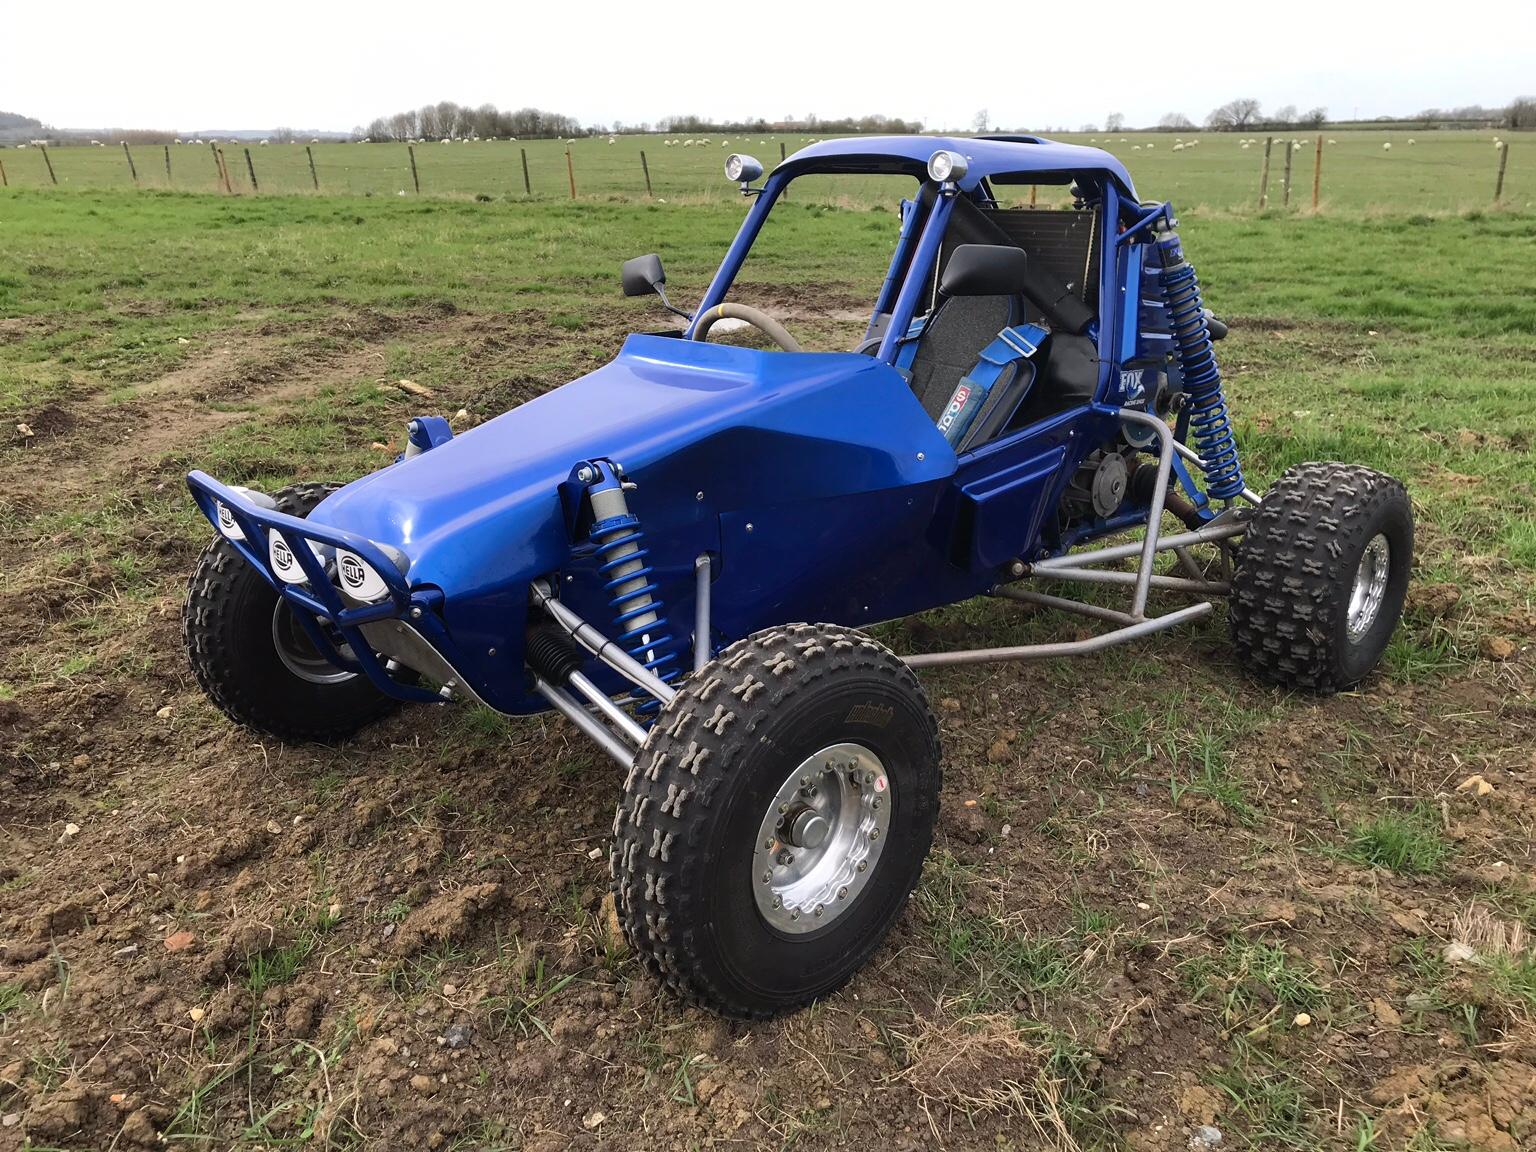 4x4 buggy for sale uk